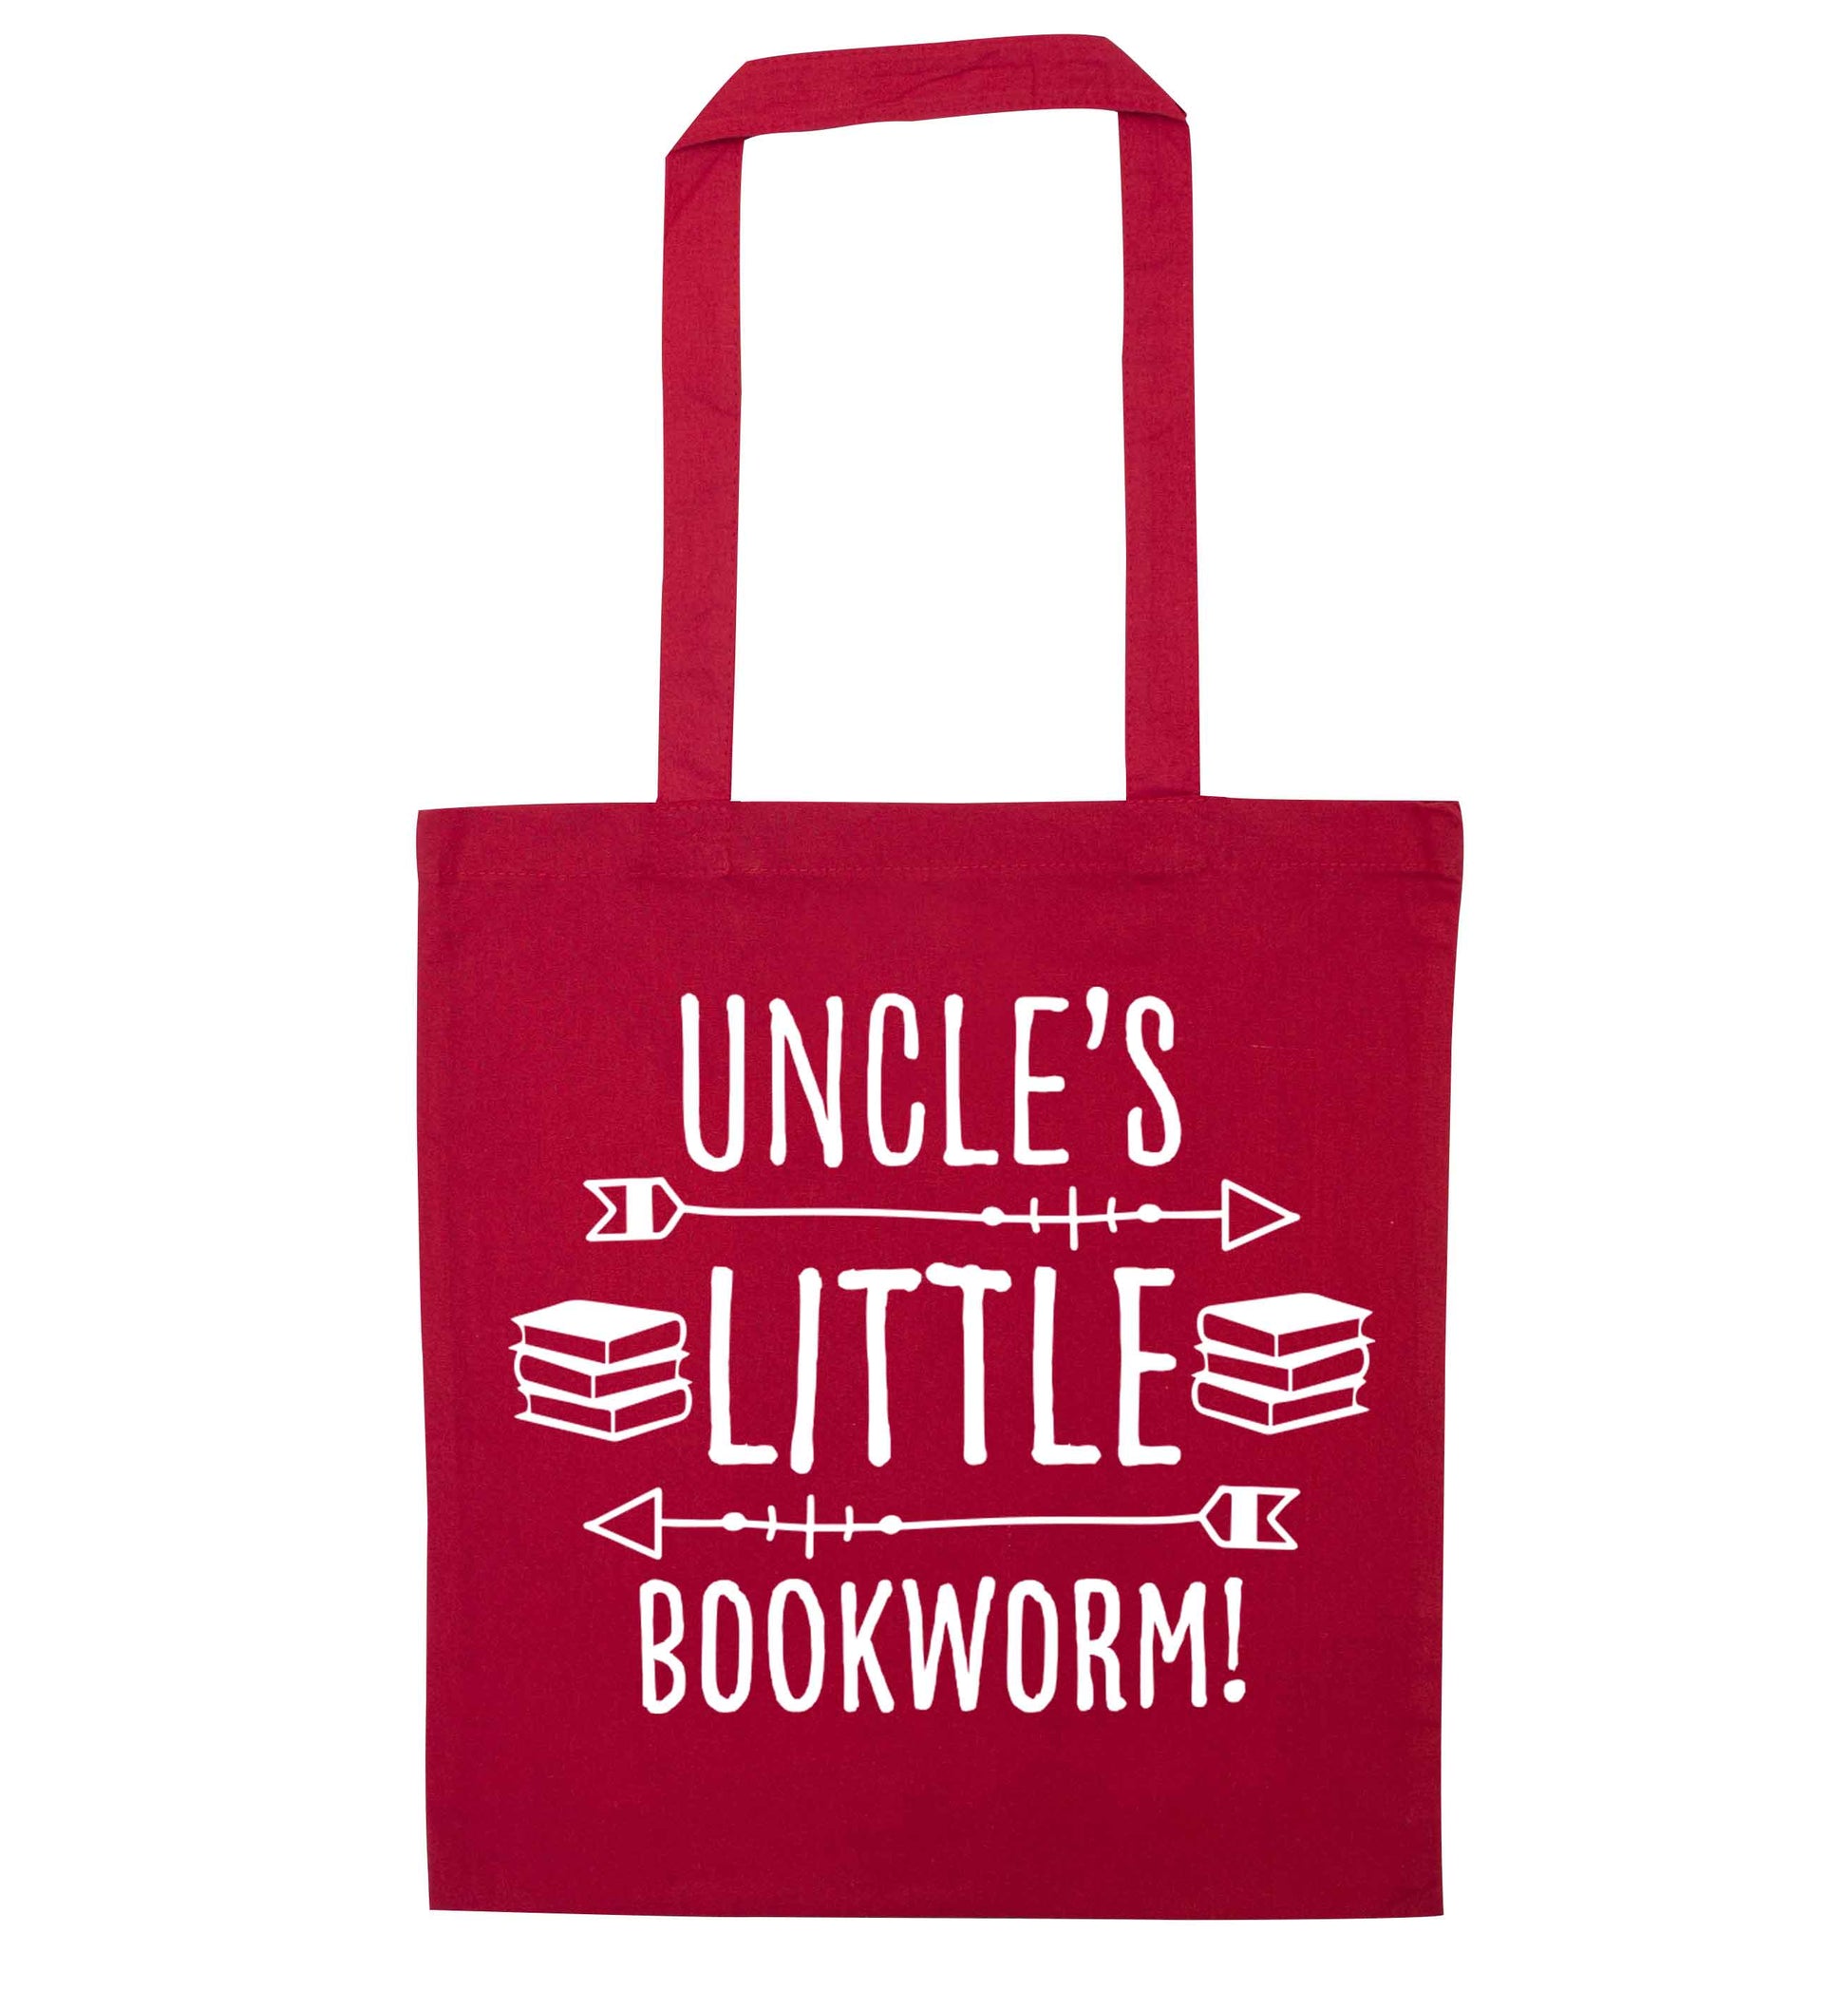 Uncle's little bookworm red tote bag